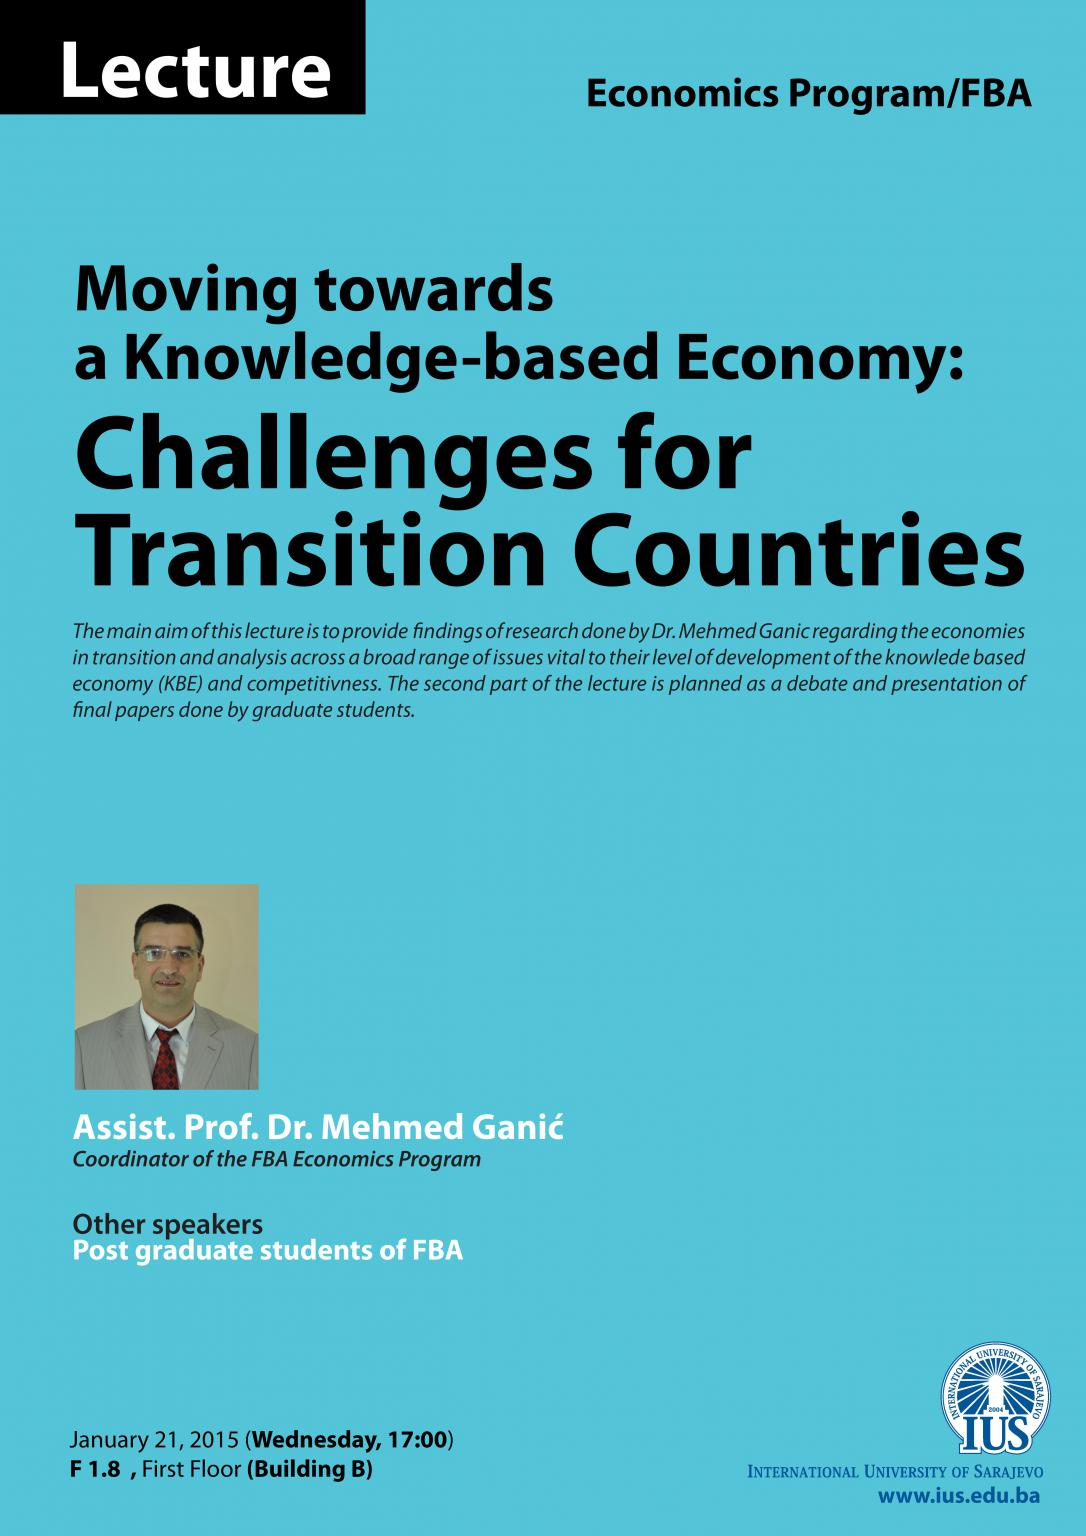  “Moving towards a Knowledge-based Economy: Challenges for Transition Countries” 